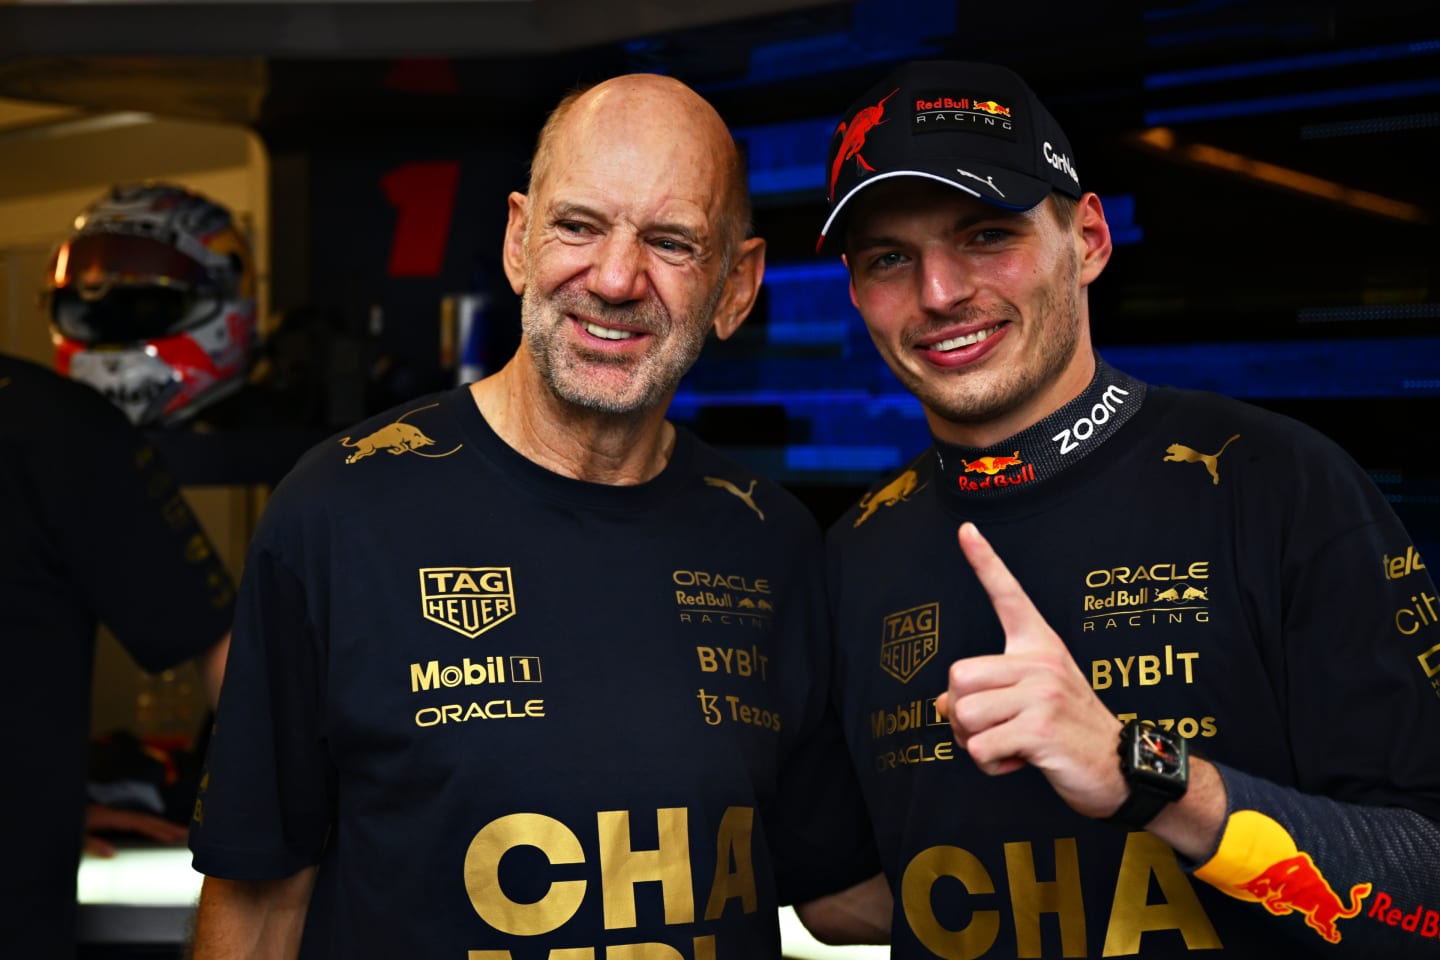 AUSTIN, TEXAS - OCTOBER 23: Race winner Max Verstappen of the Netherlands and Oracle Red Bull